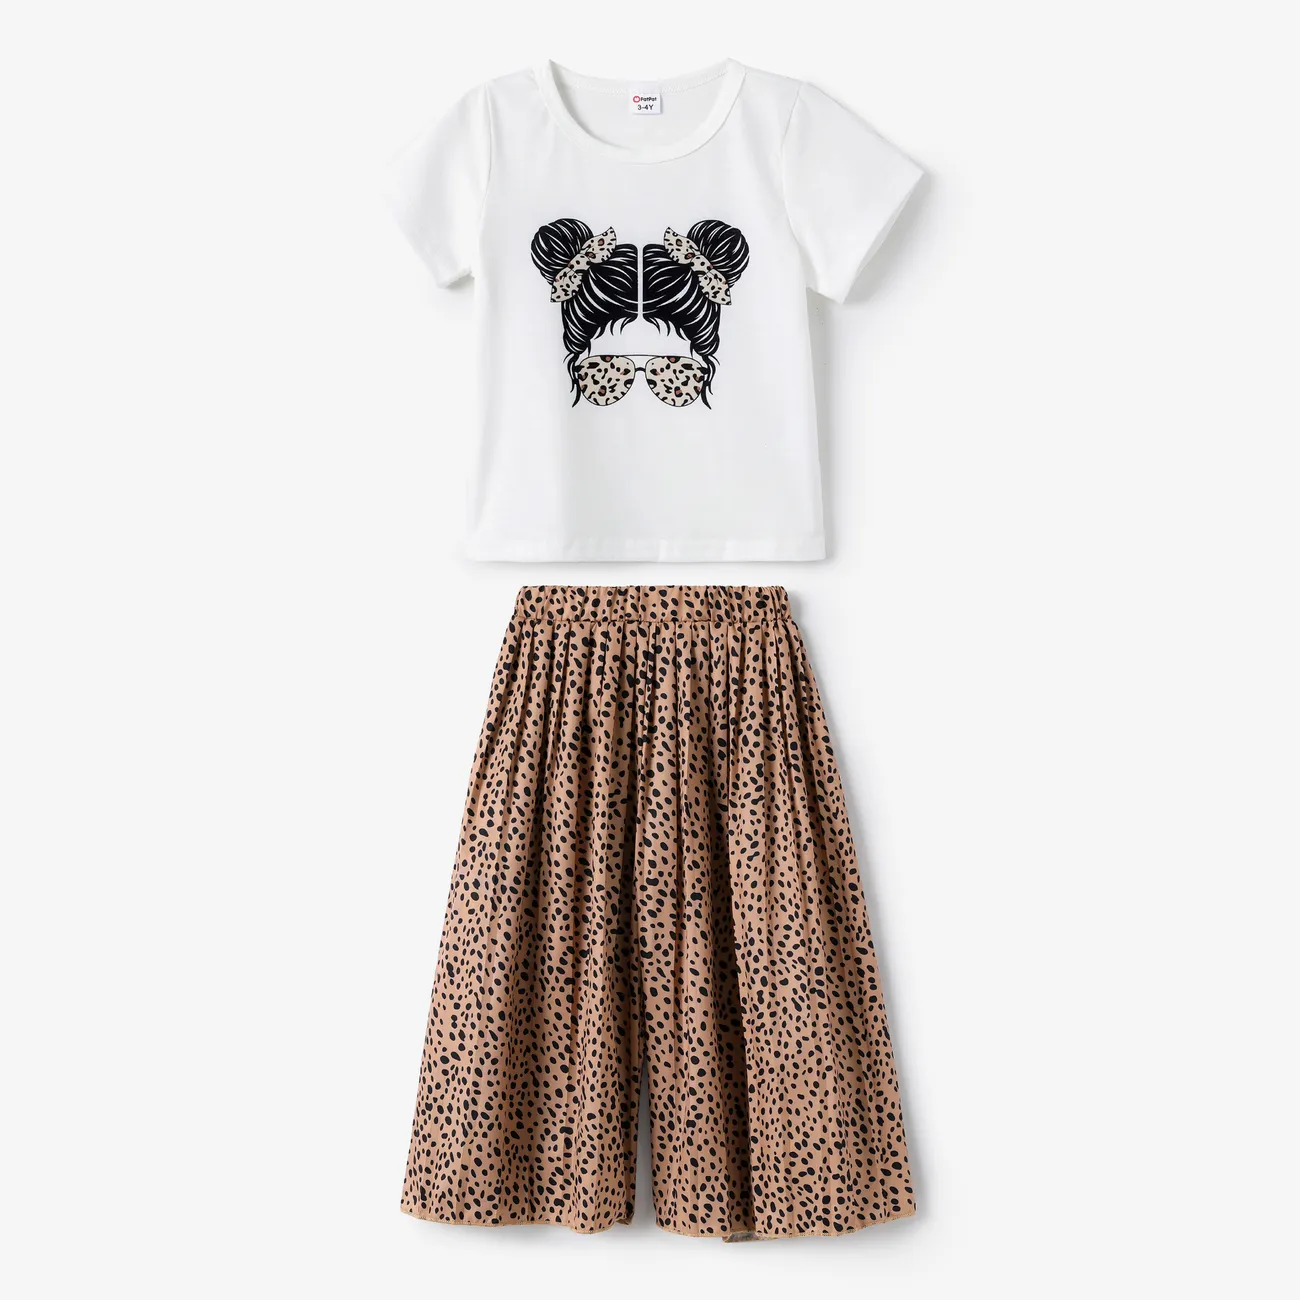 Girl's 2pcs Avant-garde Character T-Shirt and Wide Leg Pant Set with Pleat, White Print White big image 1